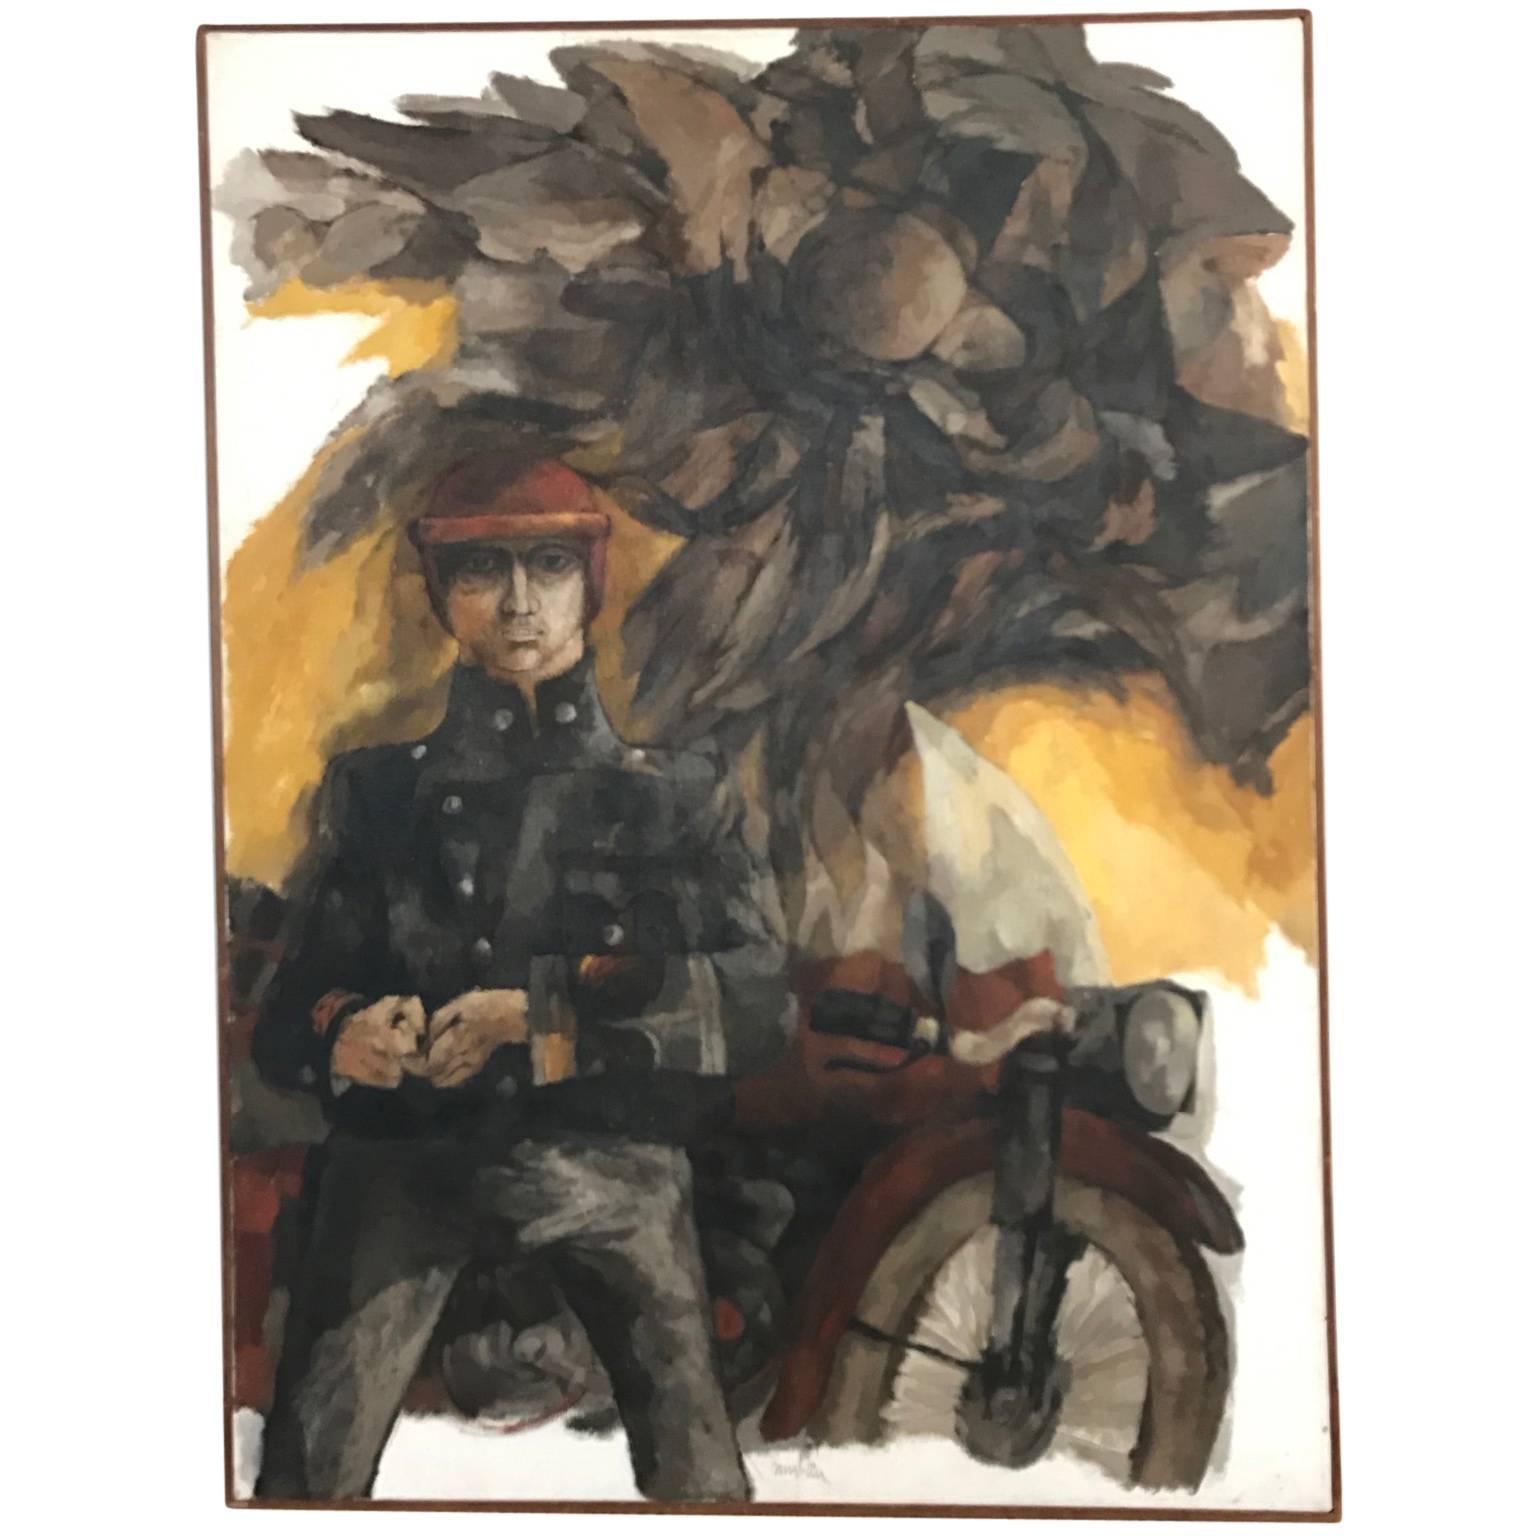 Bob Camblin- &quot;Dark vision of the cool saint&quot;

Great vintage Houston Texas artist Bob Camblin oil painting of a man in leathers standing in front of his motorcycle. 